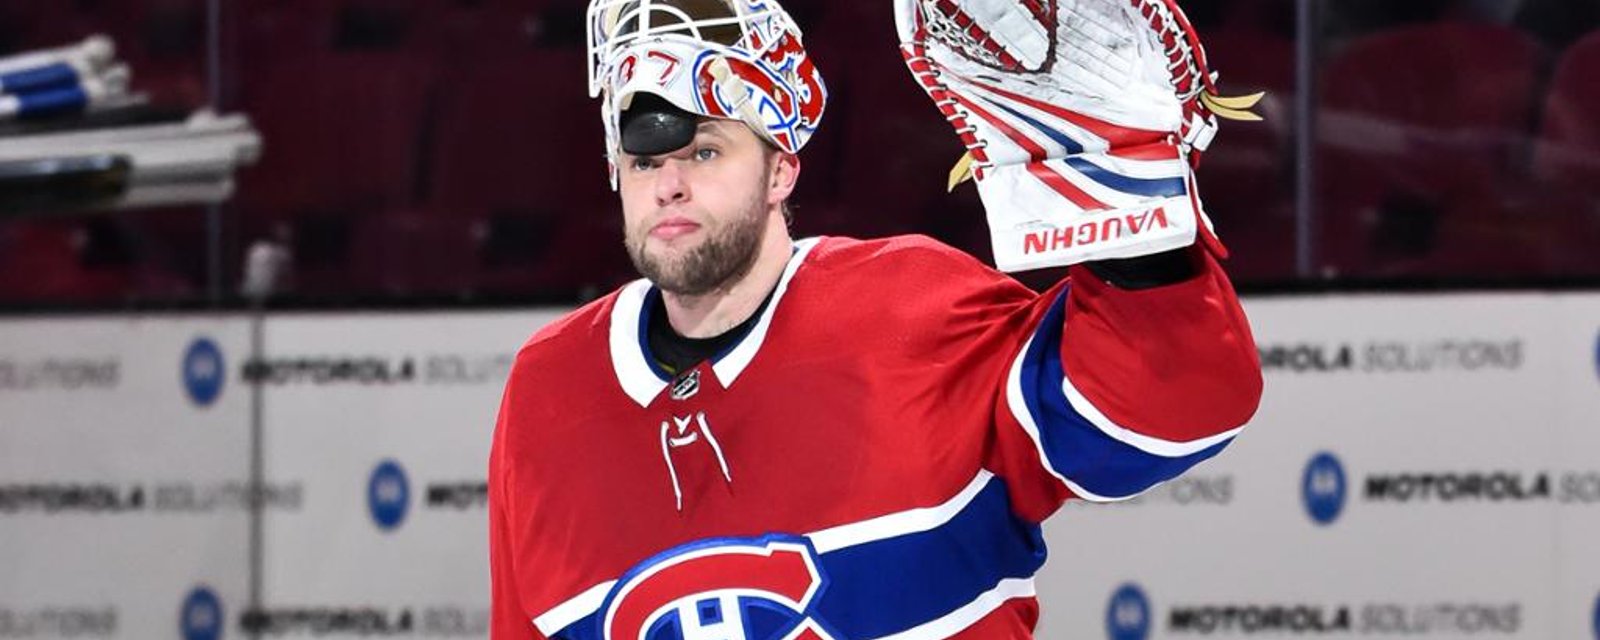 Niemi finds work despite getting pushed out the door by Canadiens